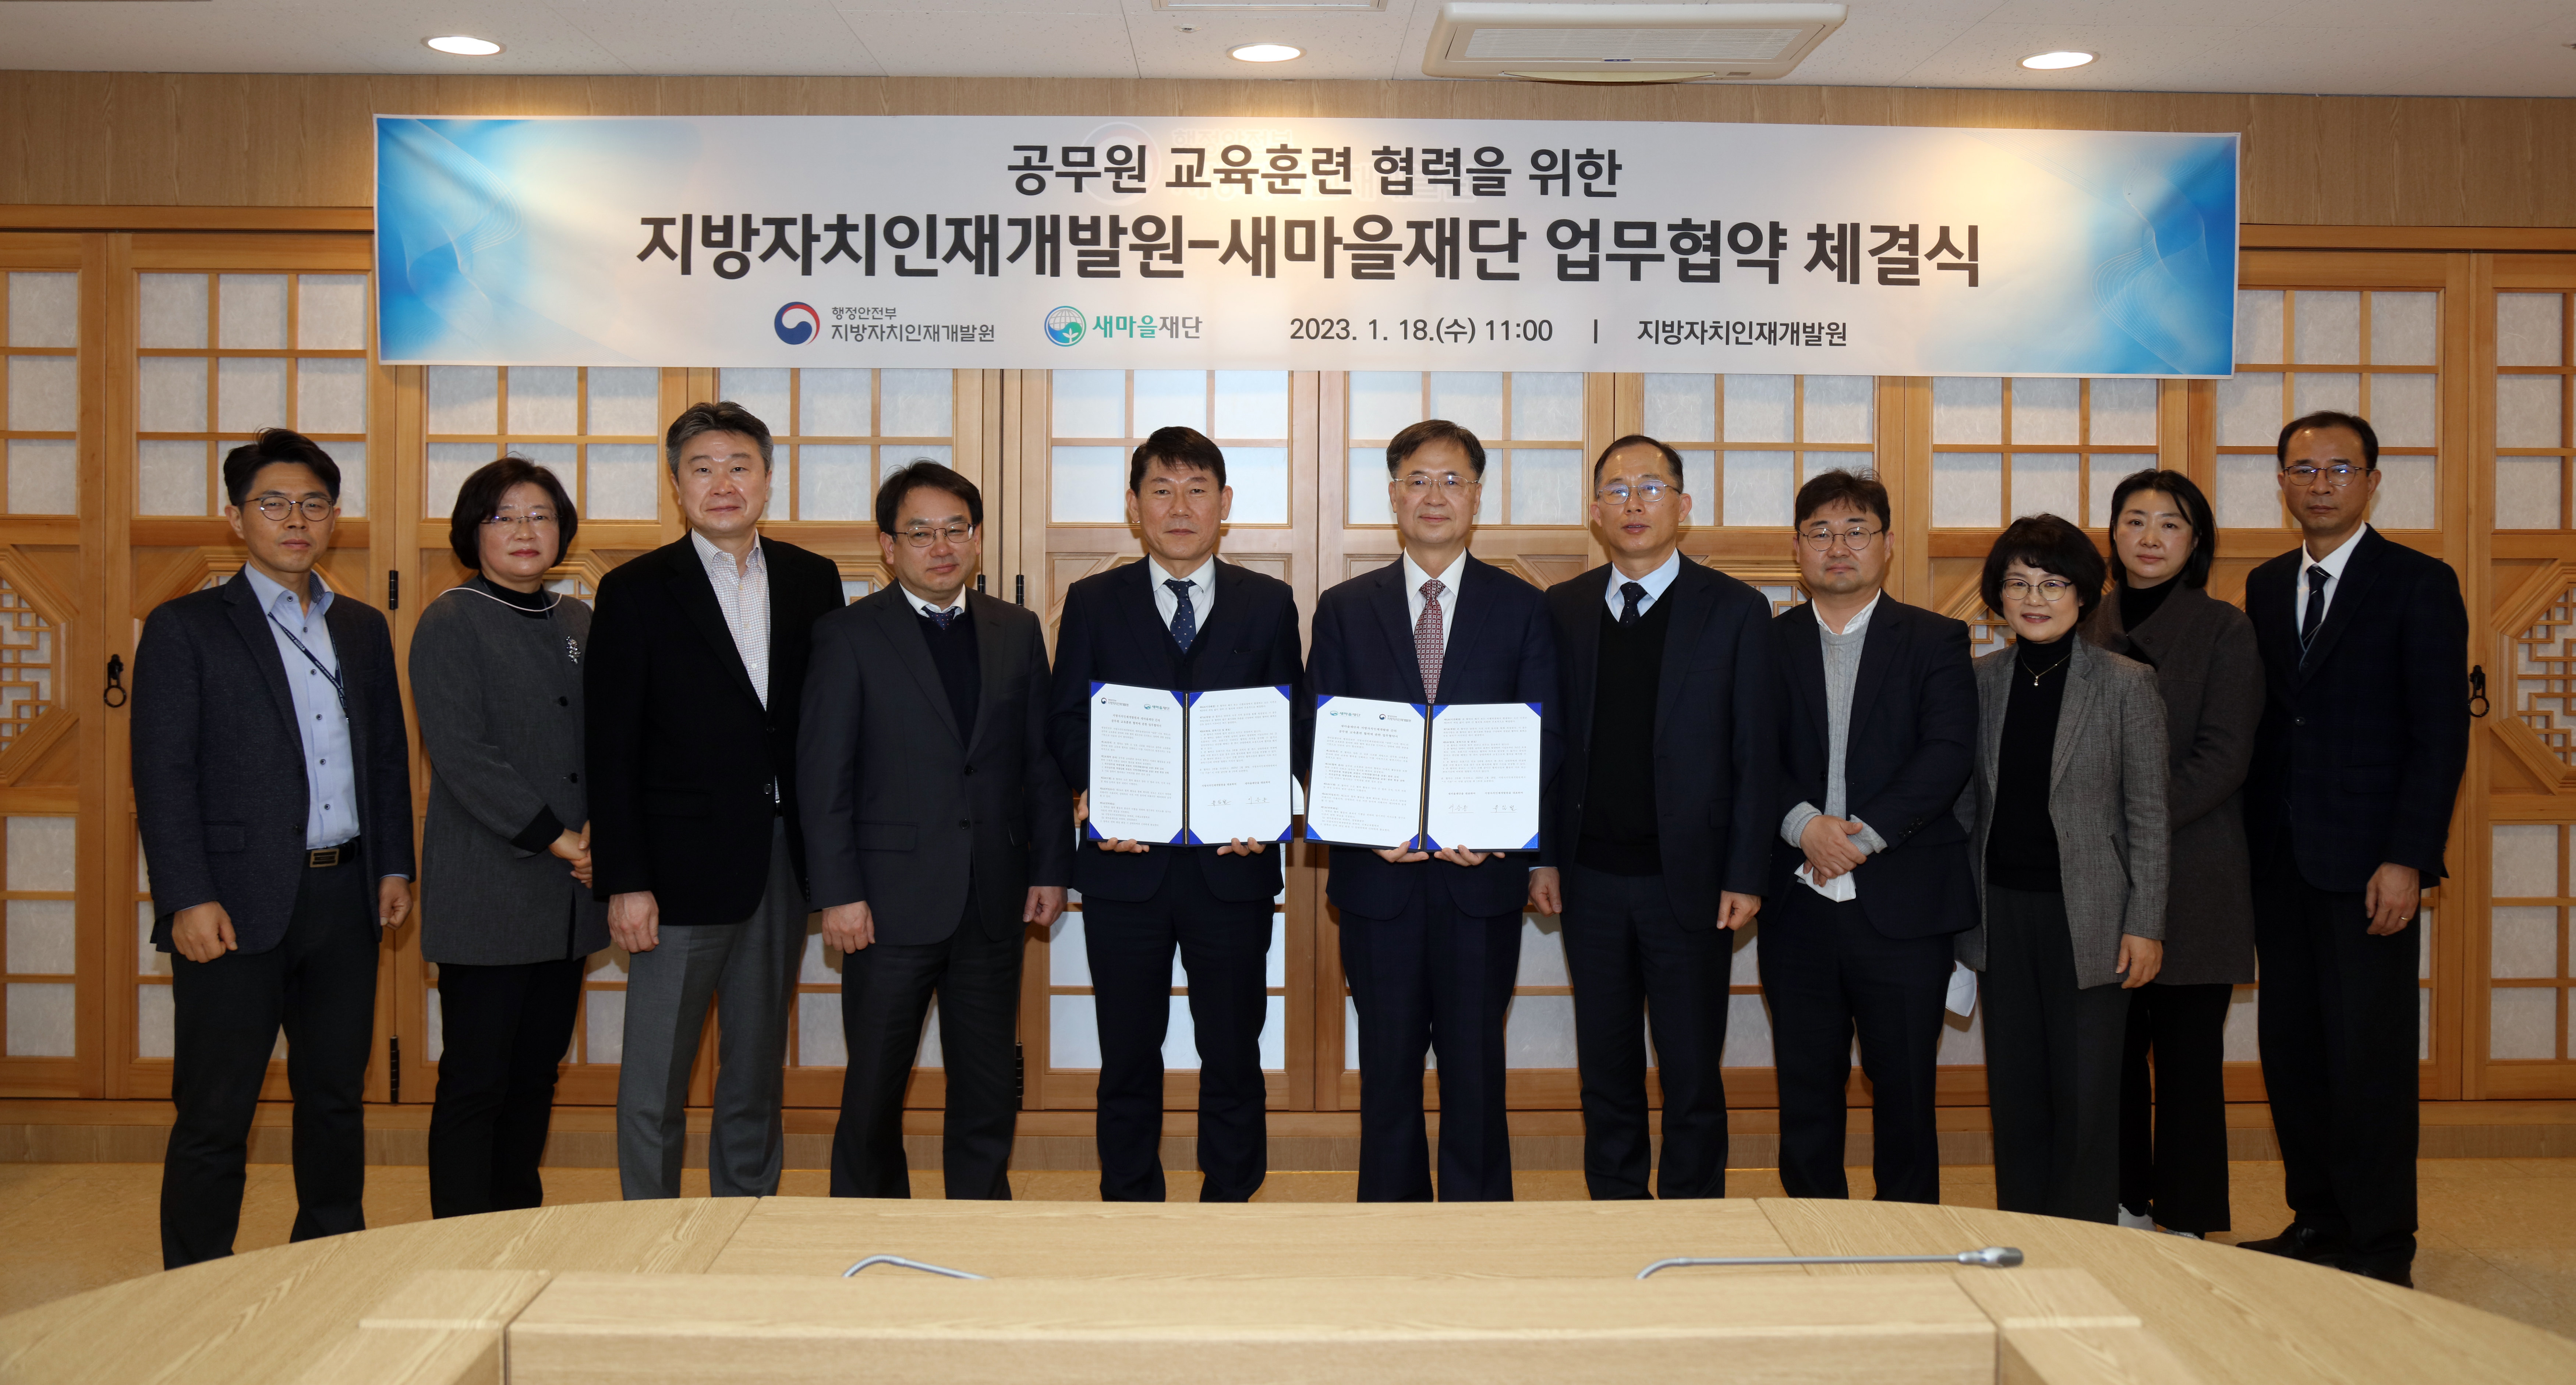 LOGODI and the SMUF Sign MoU to Share Korea%26%2339%3Bs Regional Development Experiences with Foreign Officials 큰 이미지[마우스 클릭 시 창닫기]